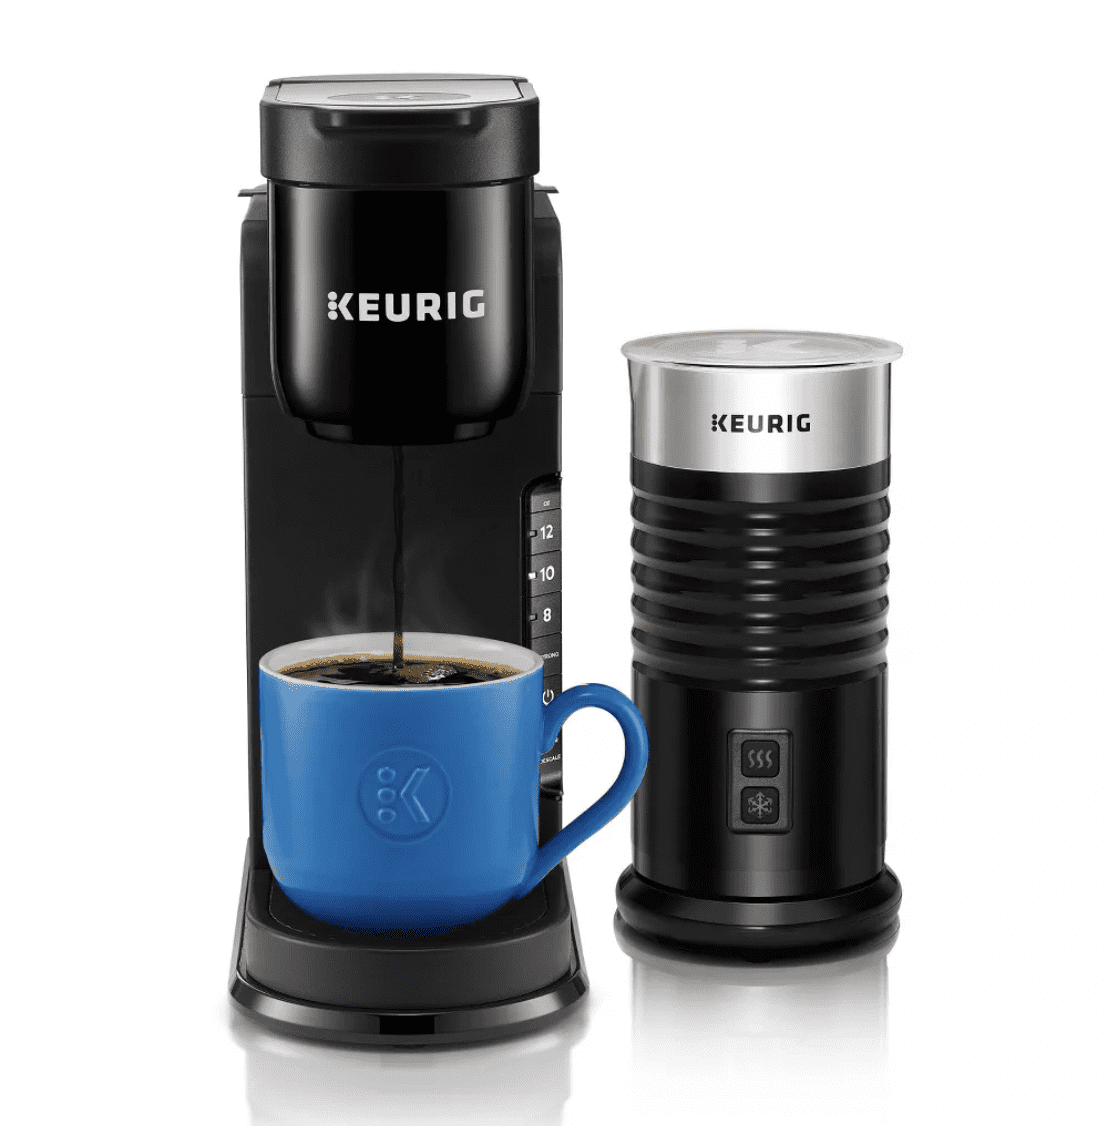 Keurig's K-Latte K-Cup brewer with frother drops below Black Friday pricing  at $57 (Reg. $90)